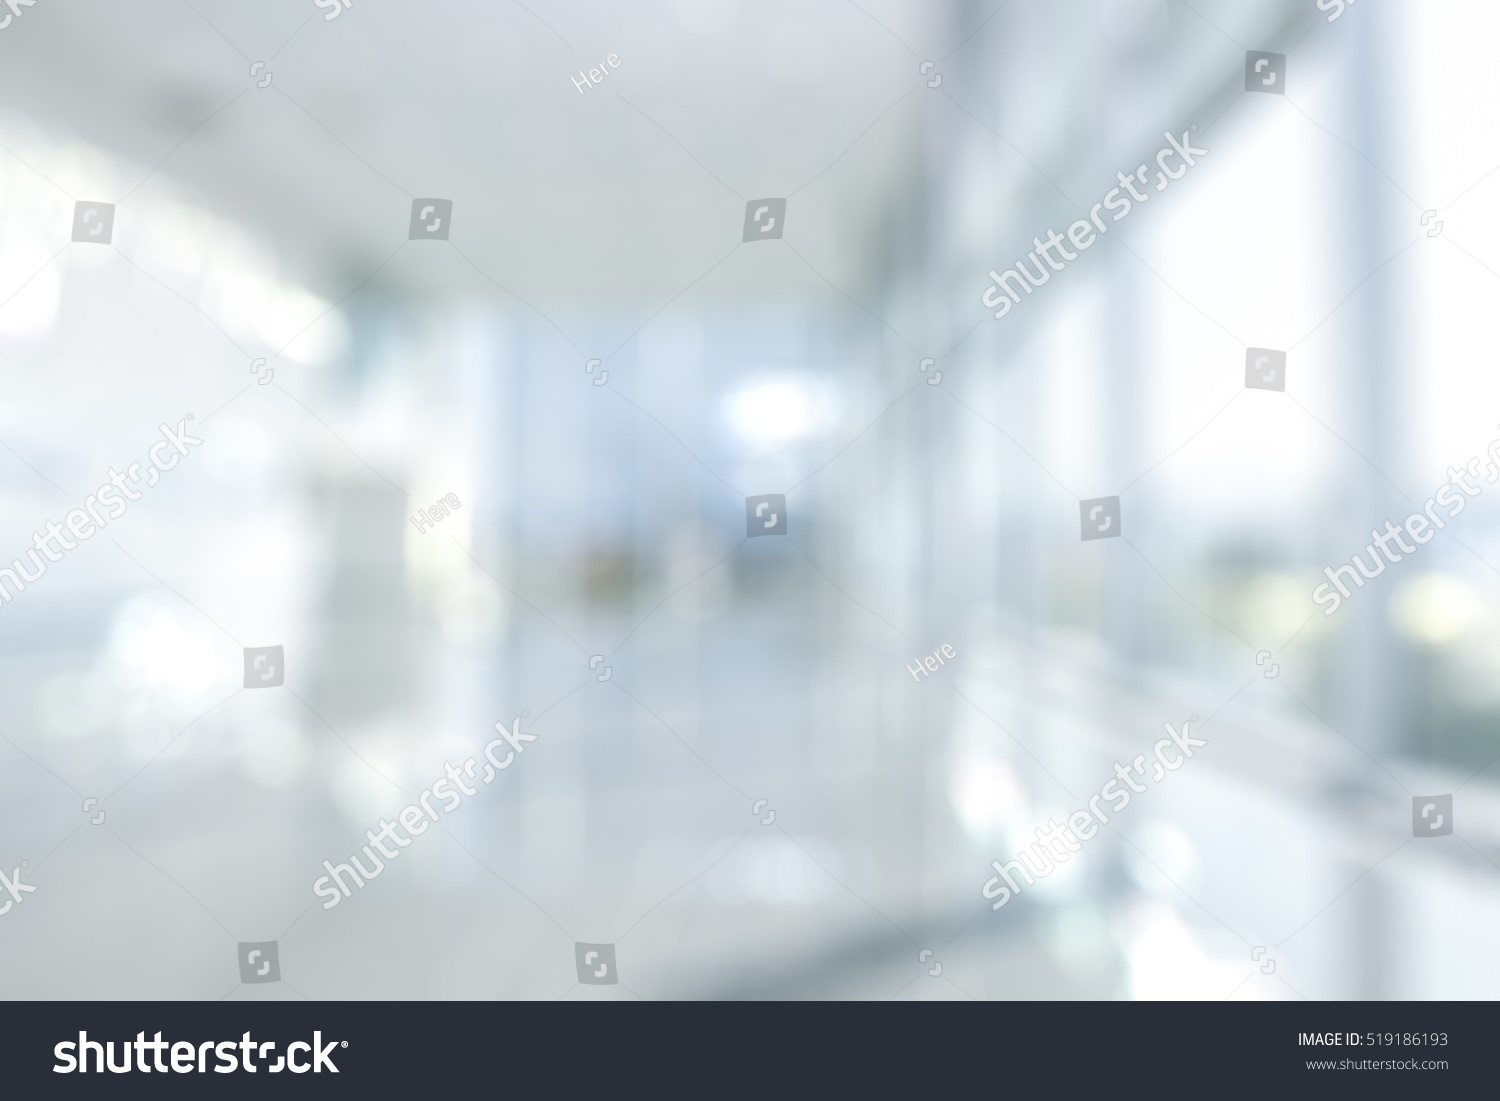 BLURRED OFFICE BACKGROUND #519186193